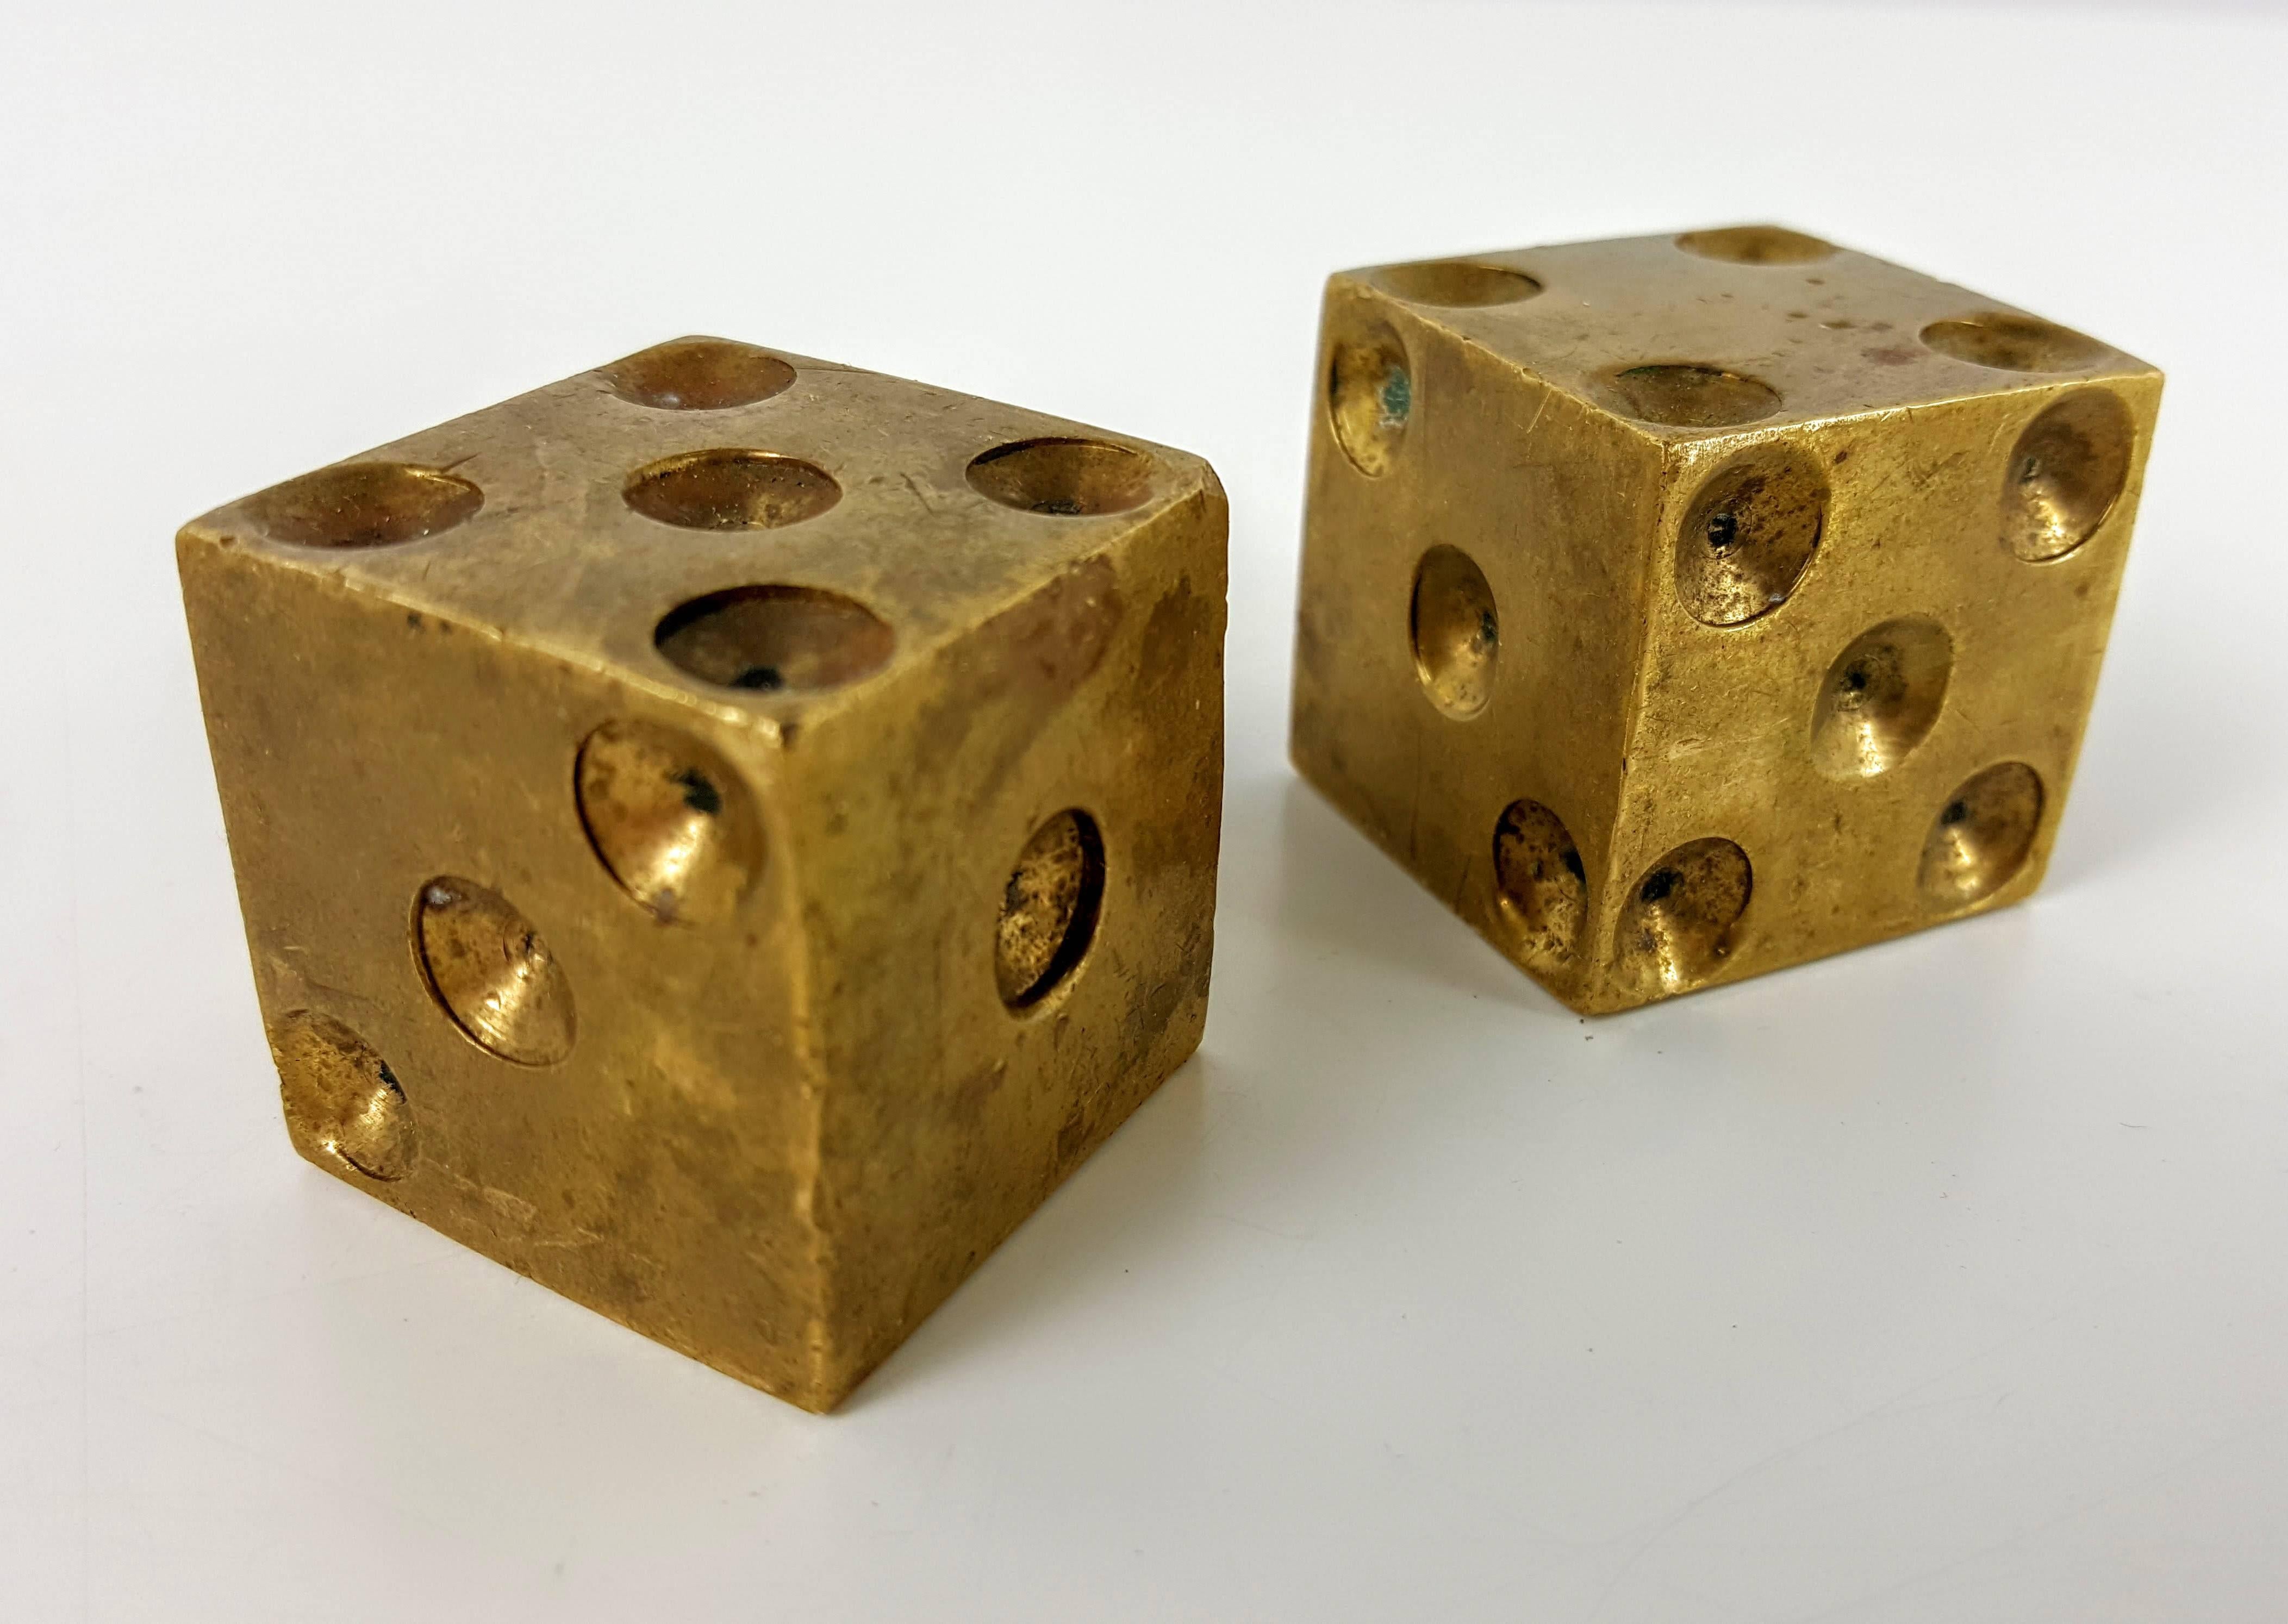 Solid brass dice paperweights or decorative objects. Machined out of solid brass. Very heavy with great patina and wear. 

